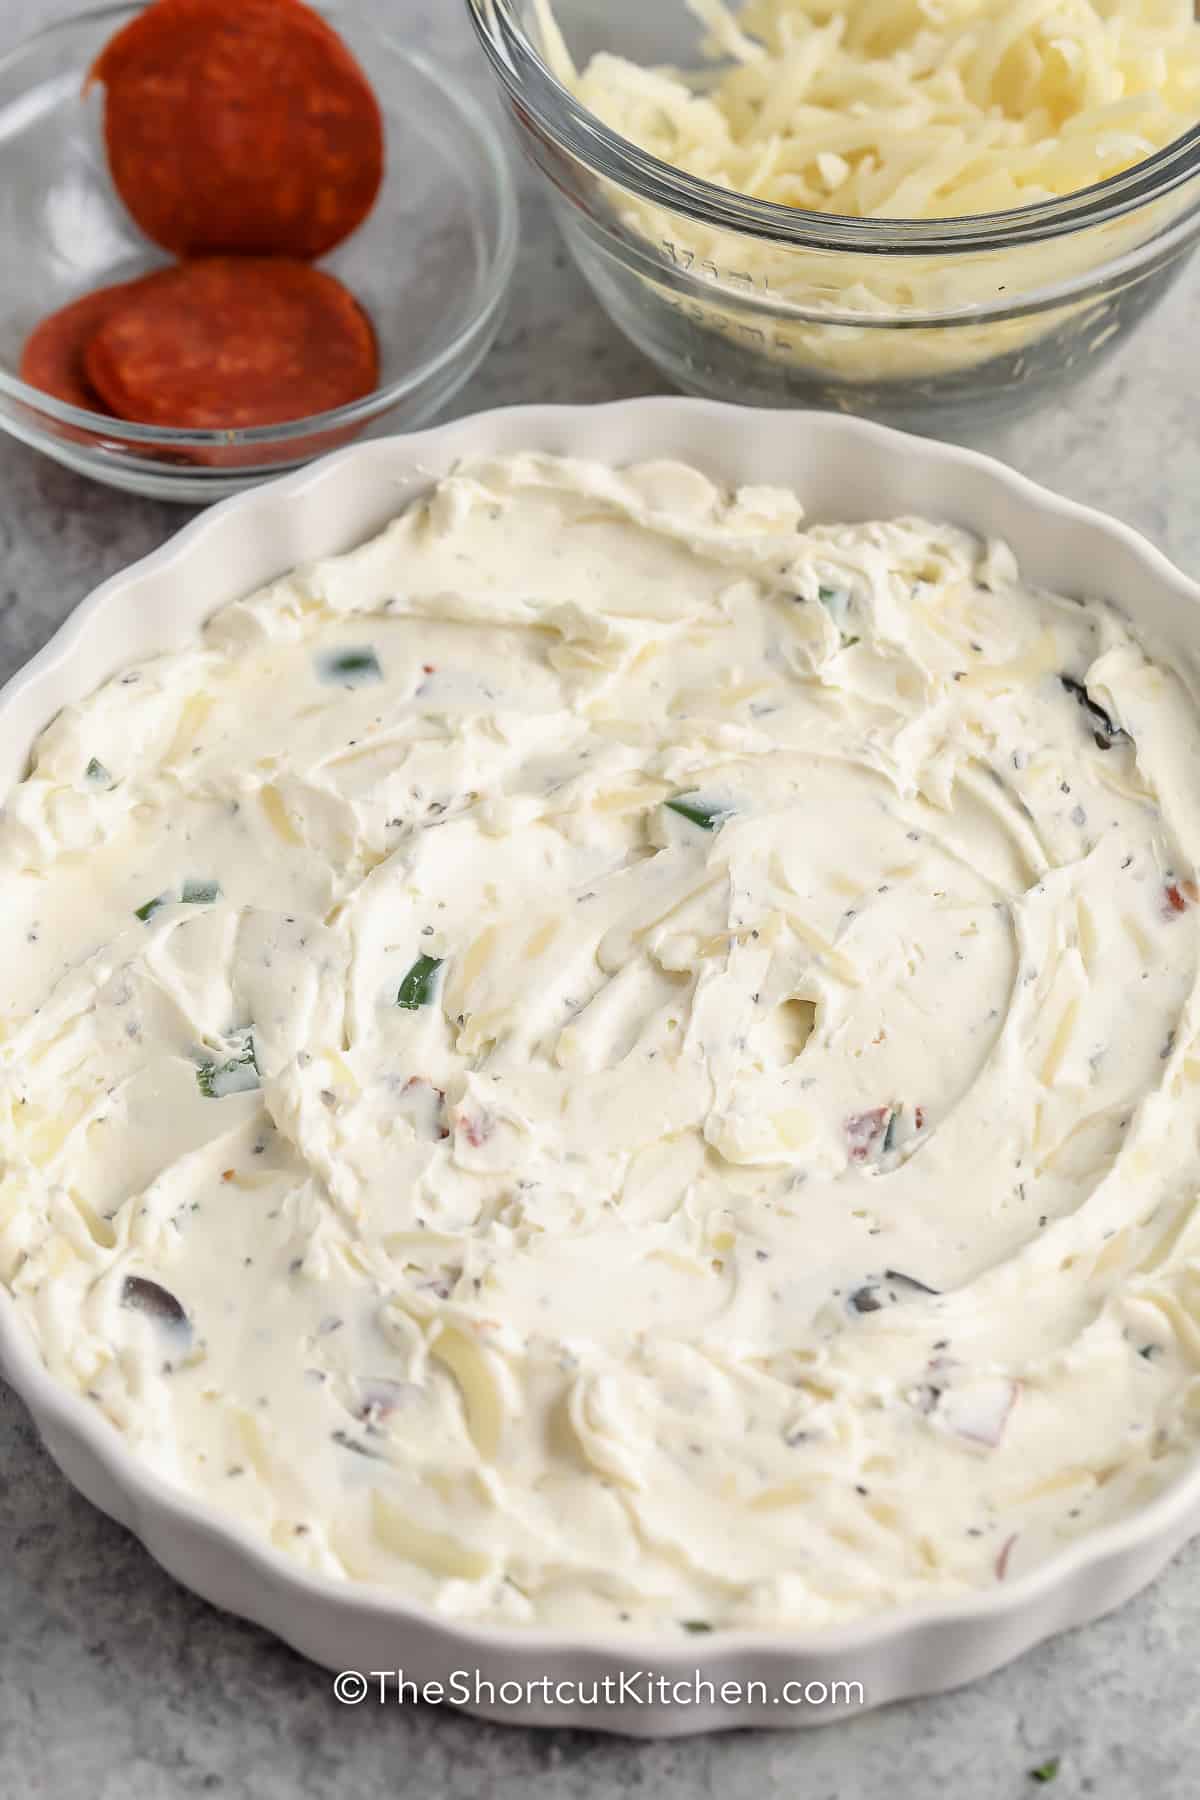 Cream cheese mixture spread in the bottom of a dish